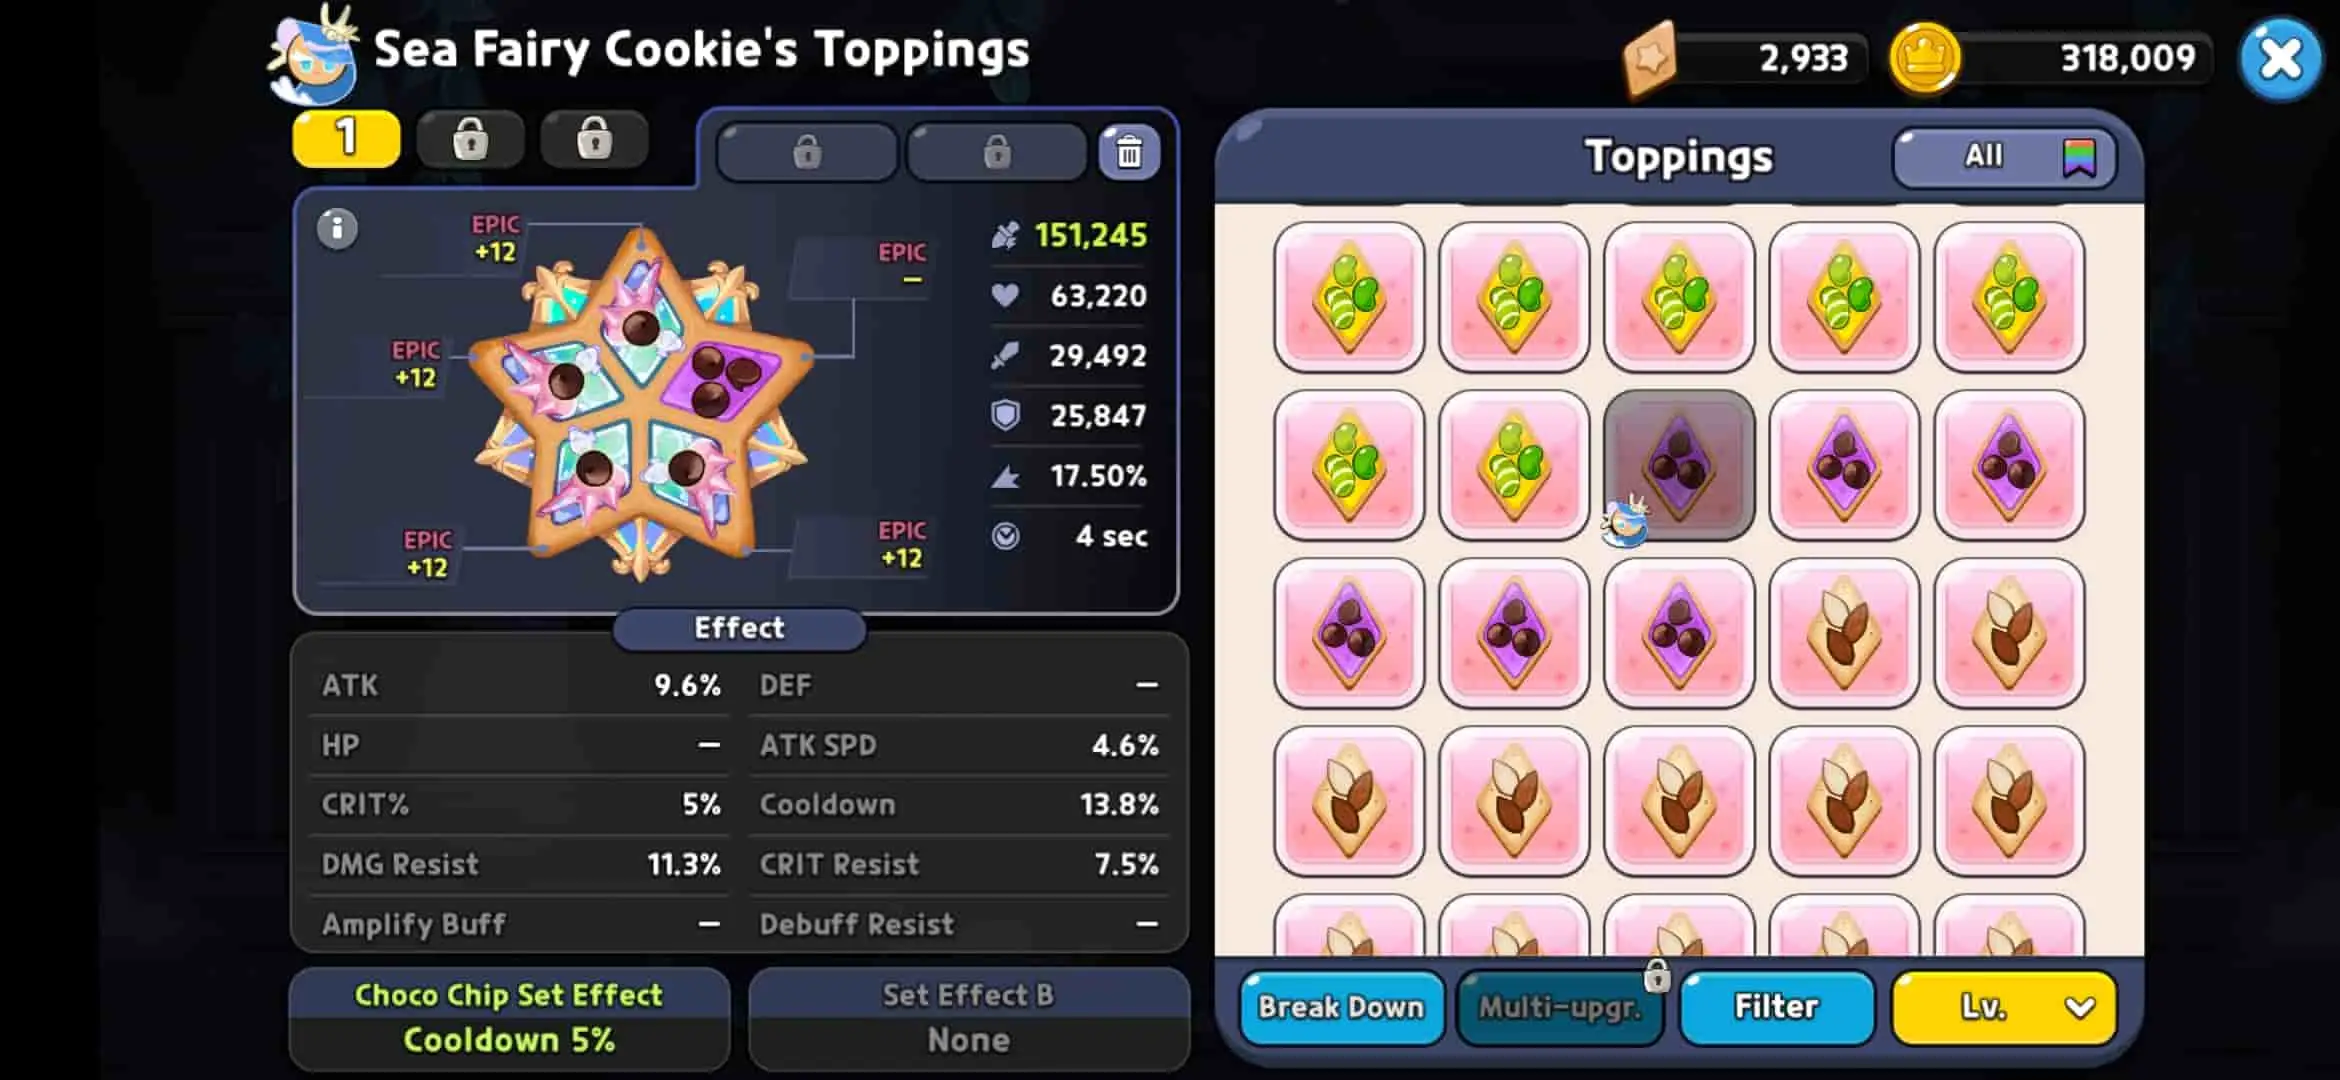 Sea Fairy Cookie toppings guide